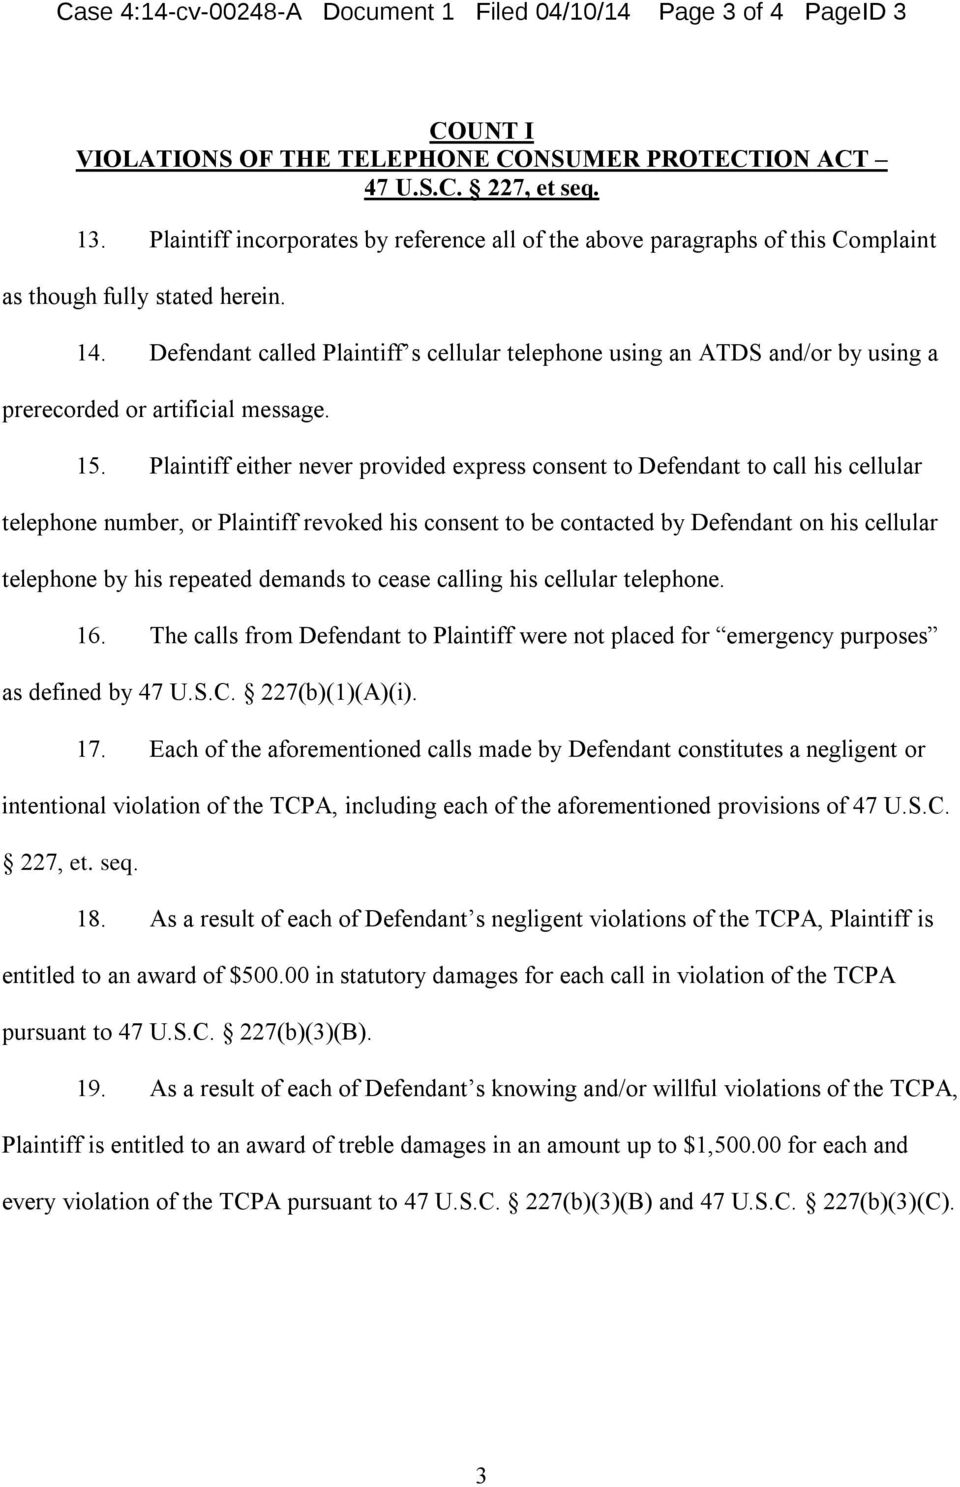 Defendant called Plaintiff s cellular telephone using an ATDS and/or by using a prerecorded or artificial message. 15.